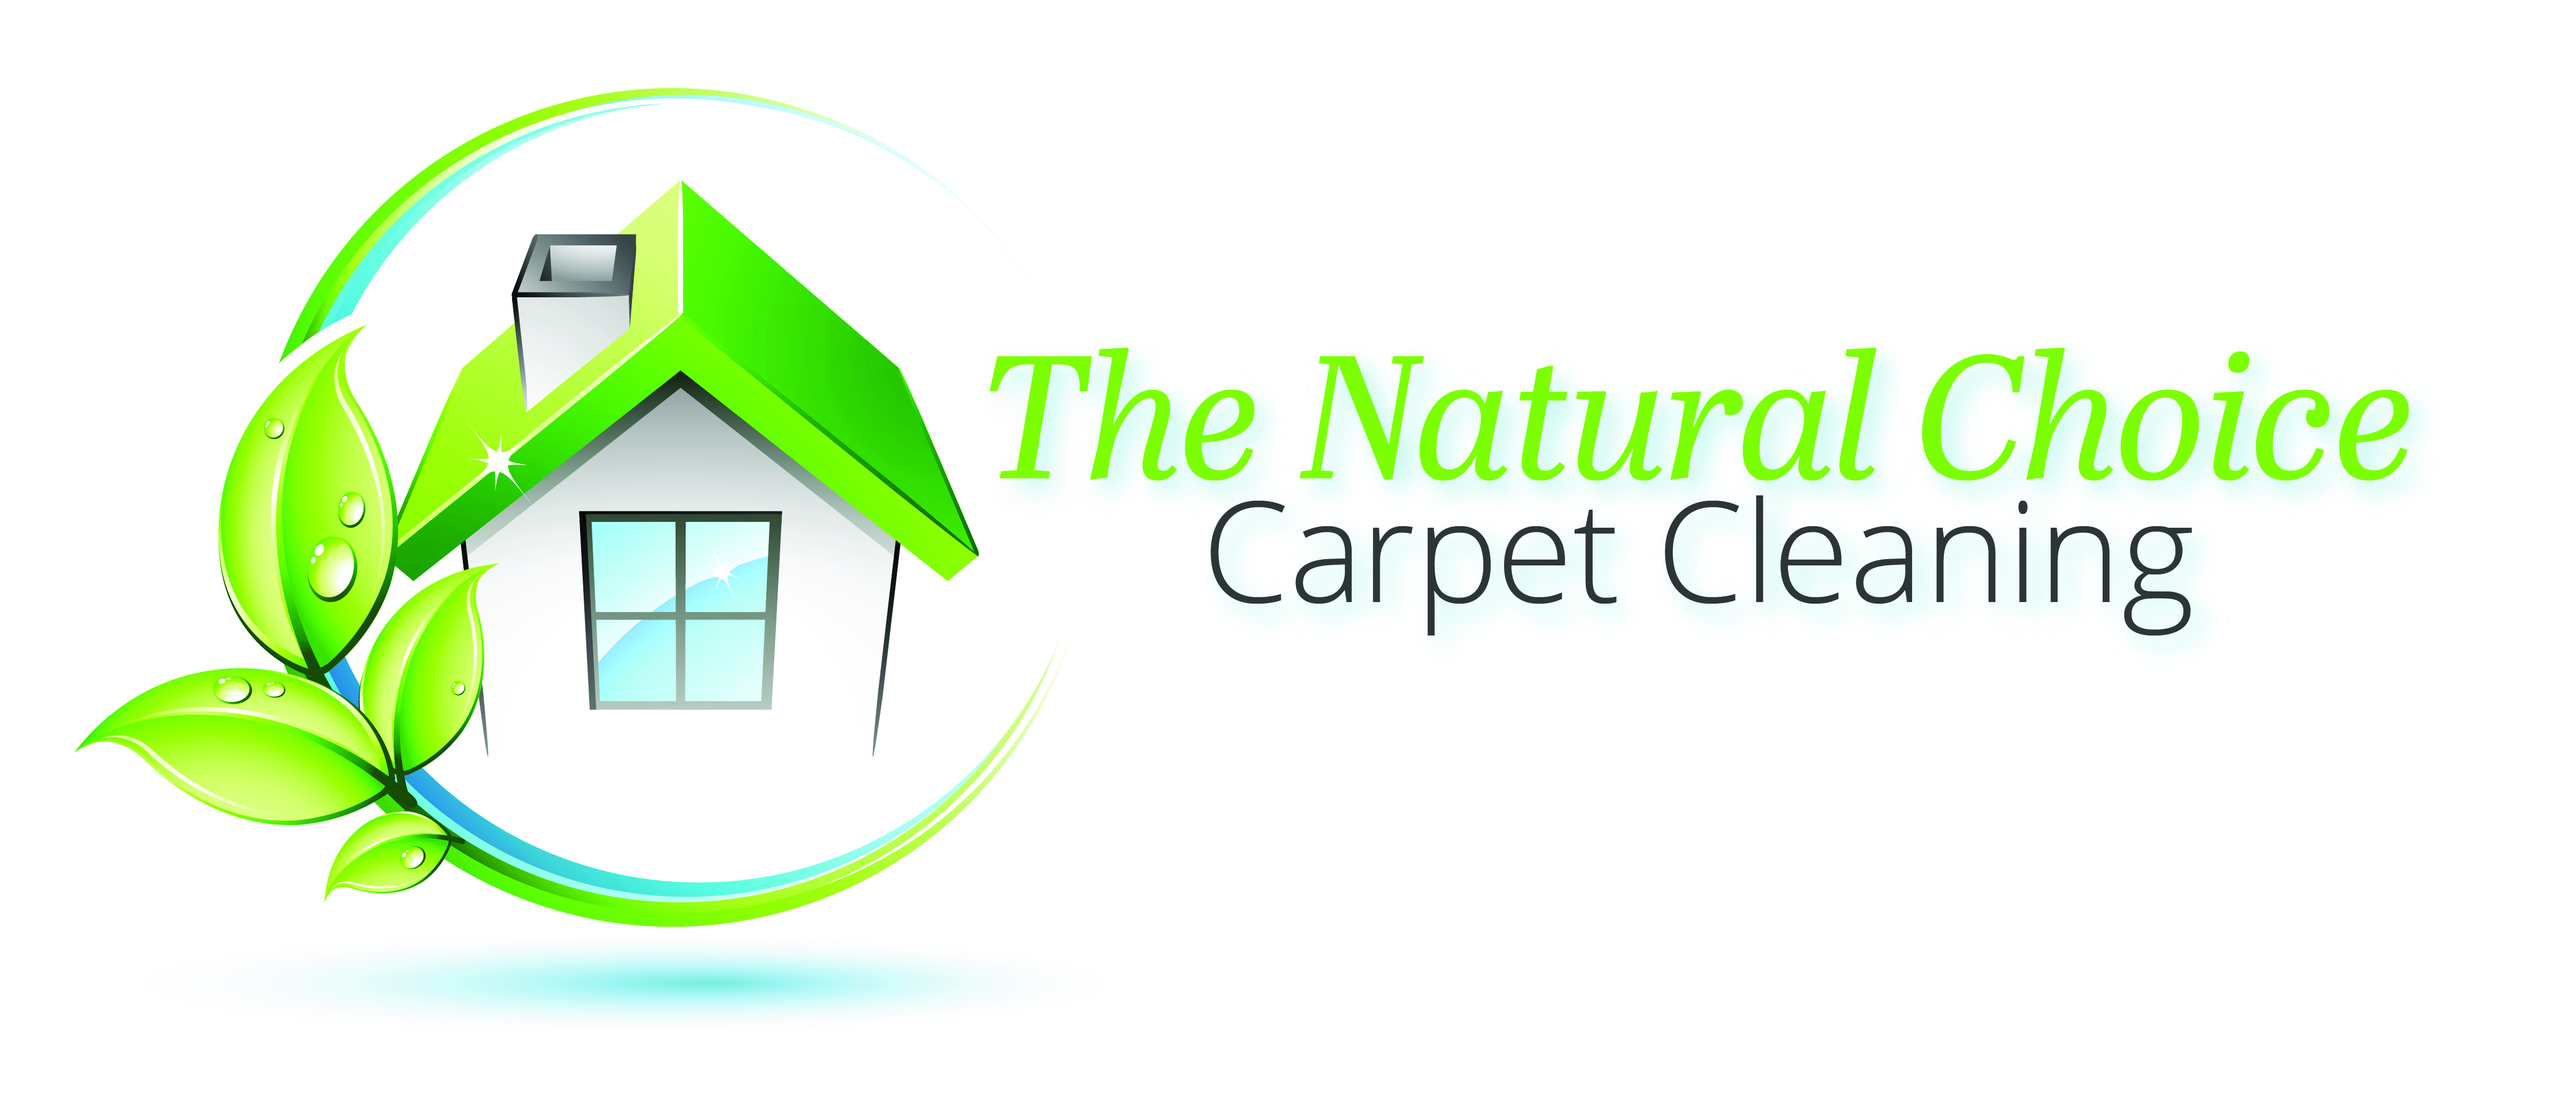 The Natural Choice Carpet Cleaning